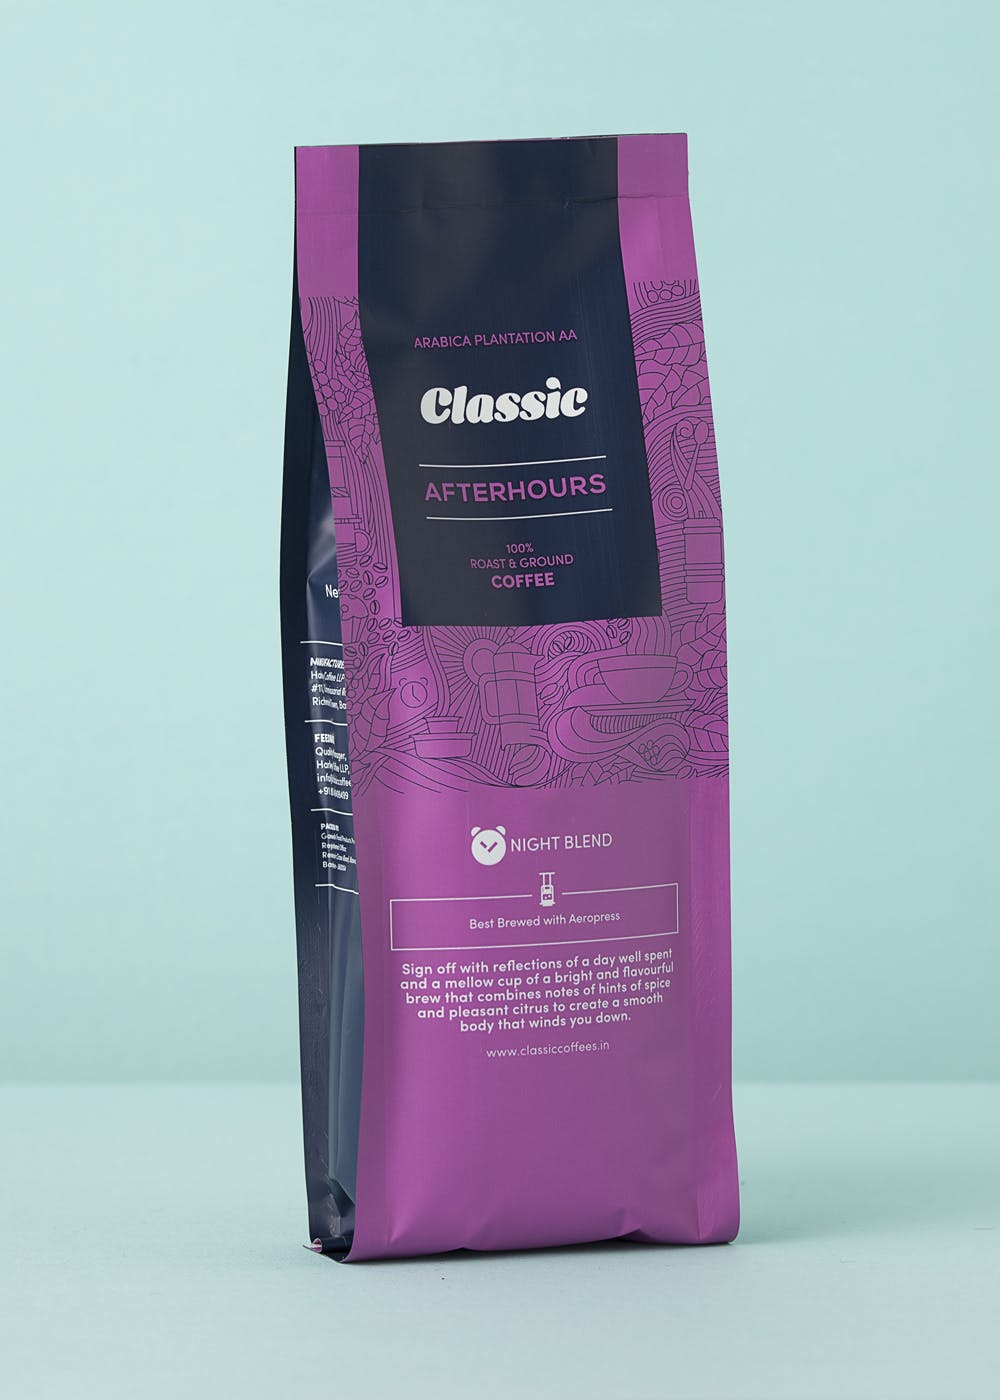 Classic After-hours- Aeropress Coffee- Night Blend- 250gm